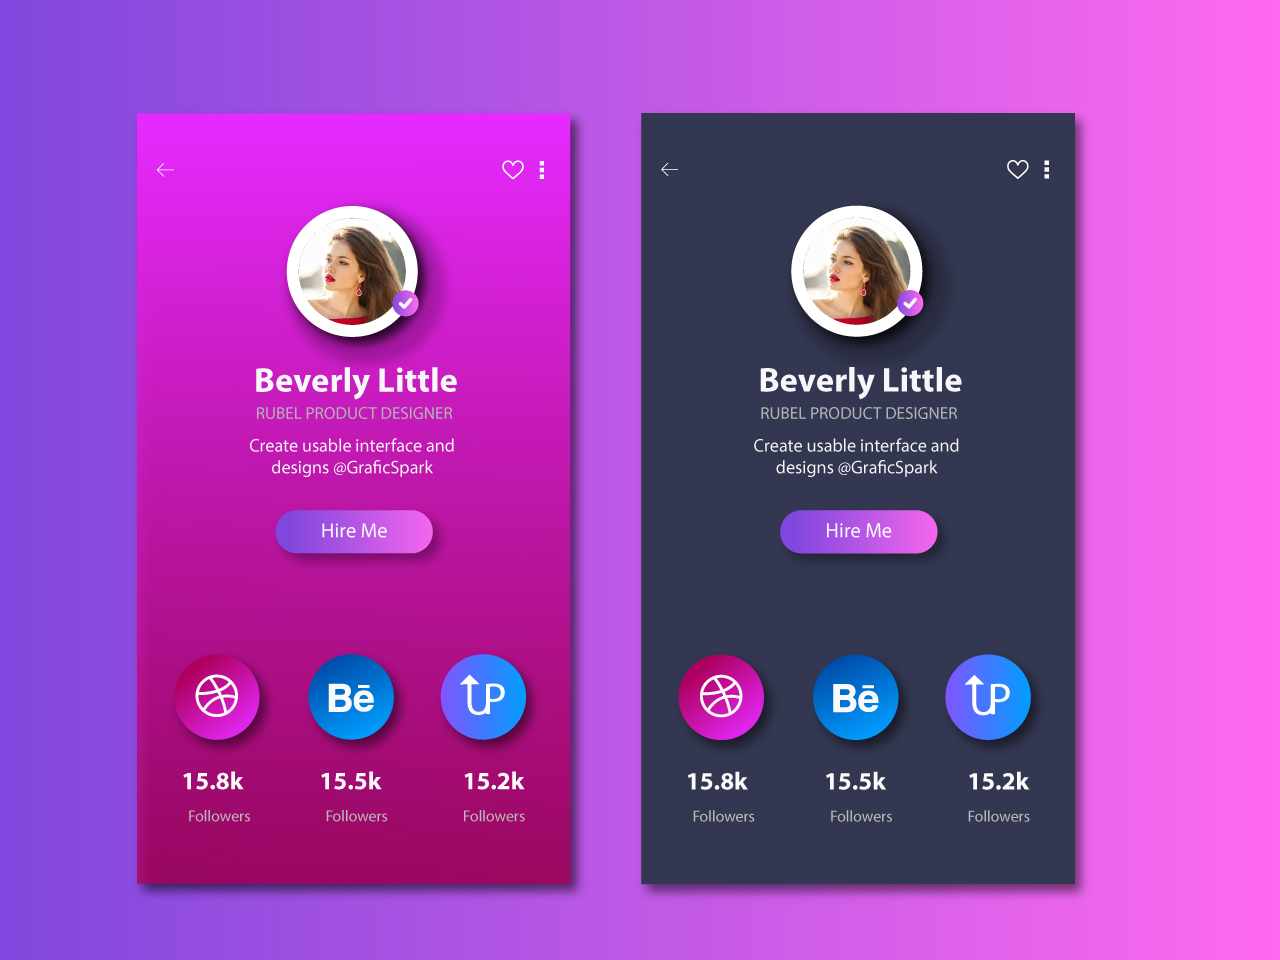 I Will Design Mobile App UI For Android Or Ios by MD RUBEL RANA on Dribbble